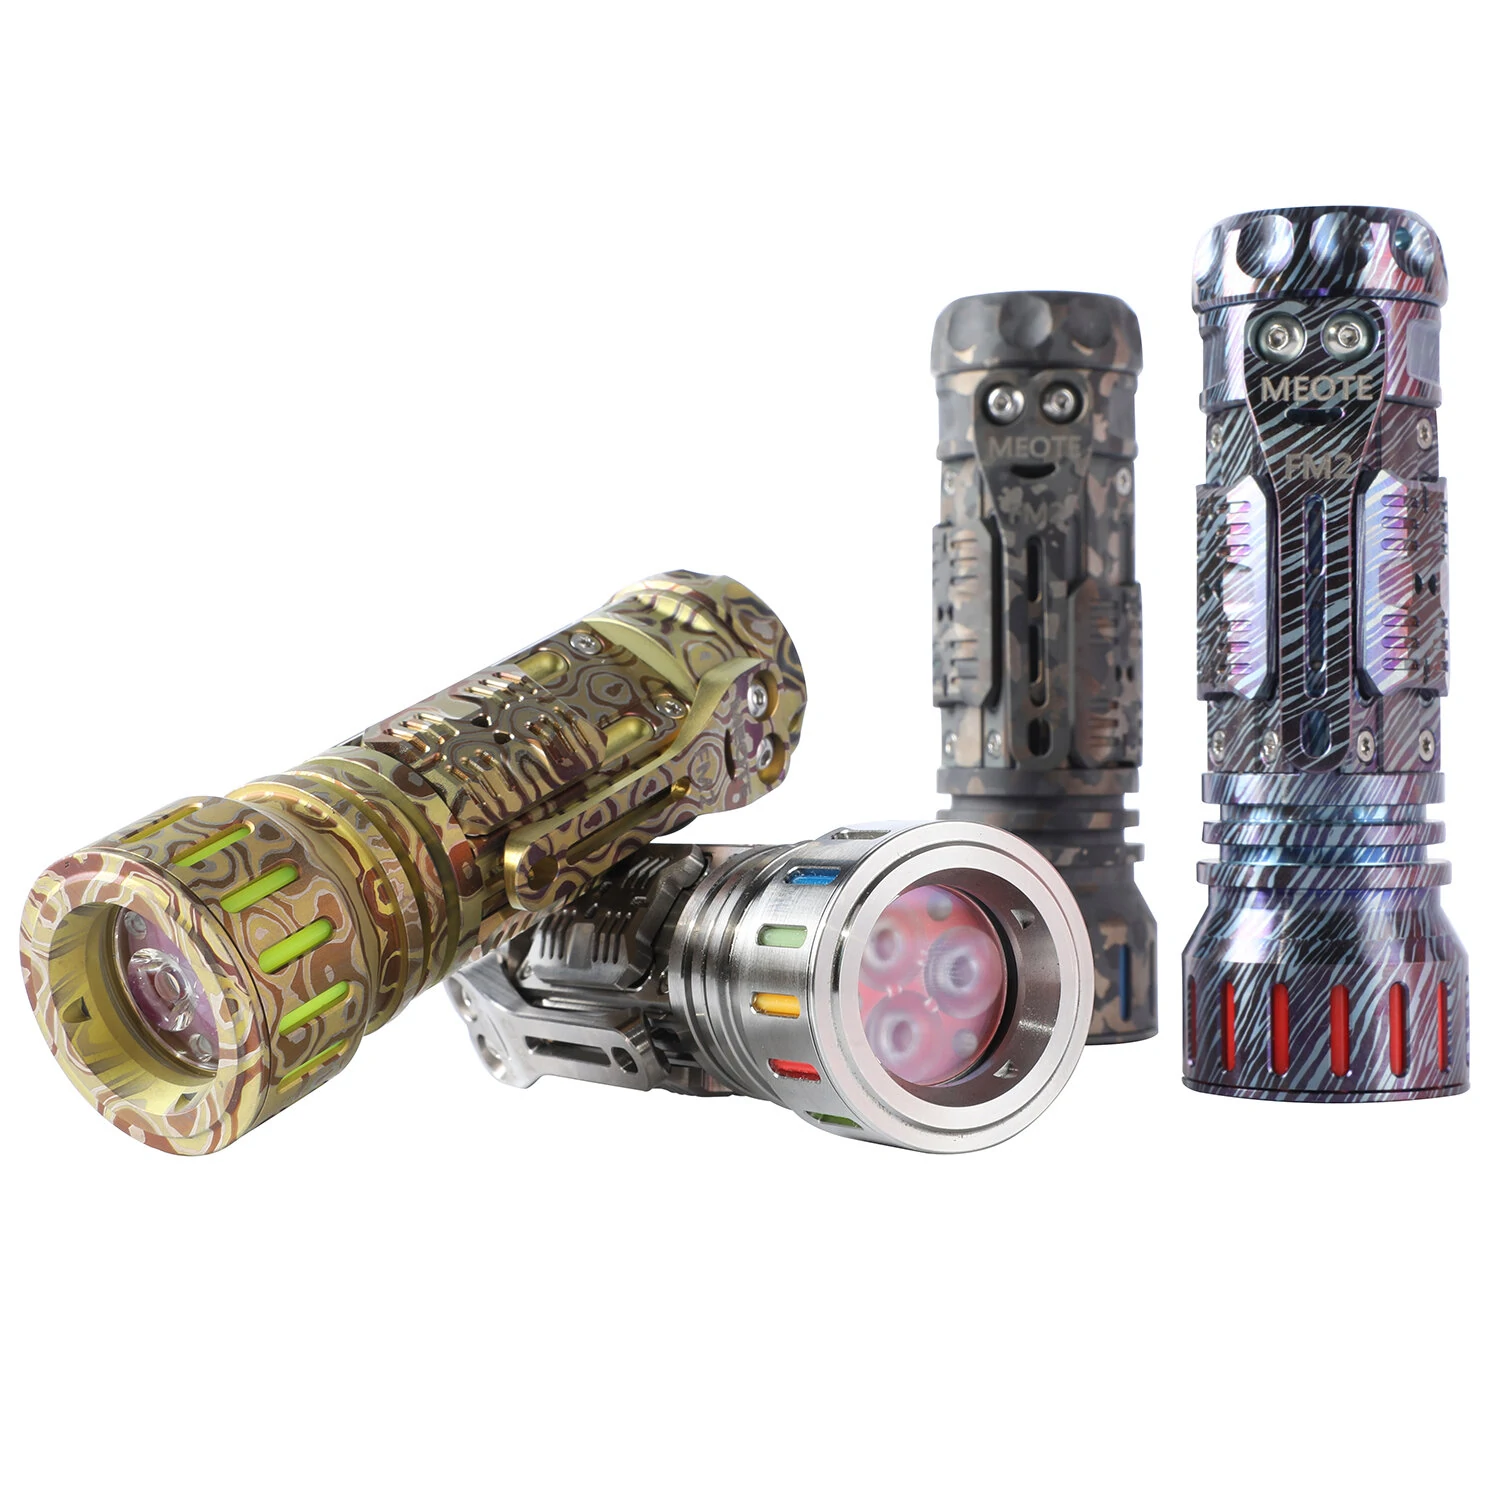 MEOTE FM2 SFS80 2360lm 225m EDC Titanium Flashlight with New UI 14500 Battery Mini LED Torch Tactical Survival Tools EDC Collections For Outdoor Camping Hunting Fishing - Titanium